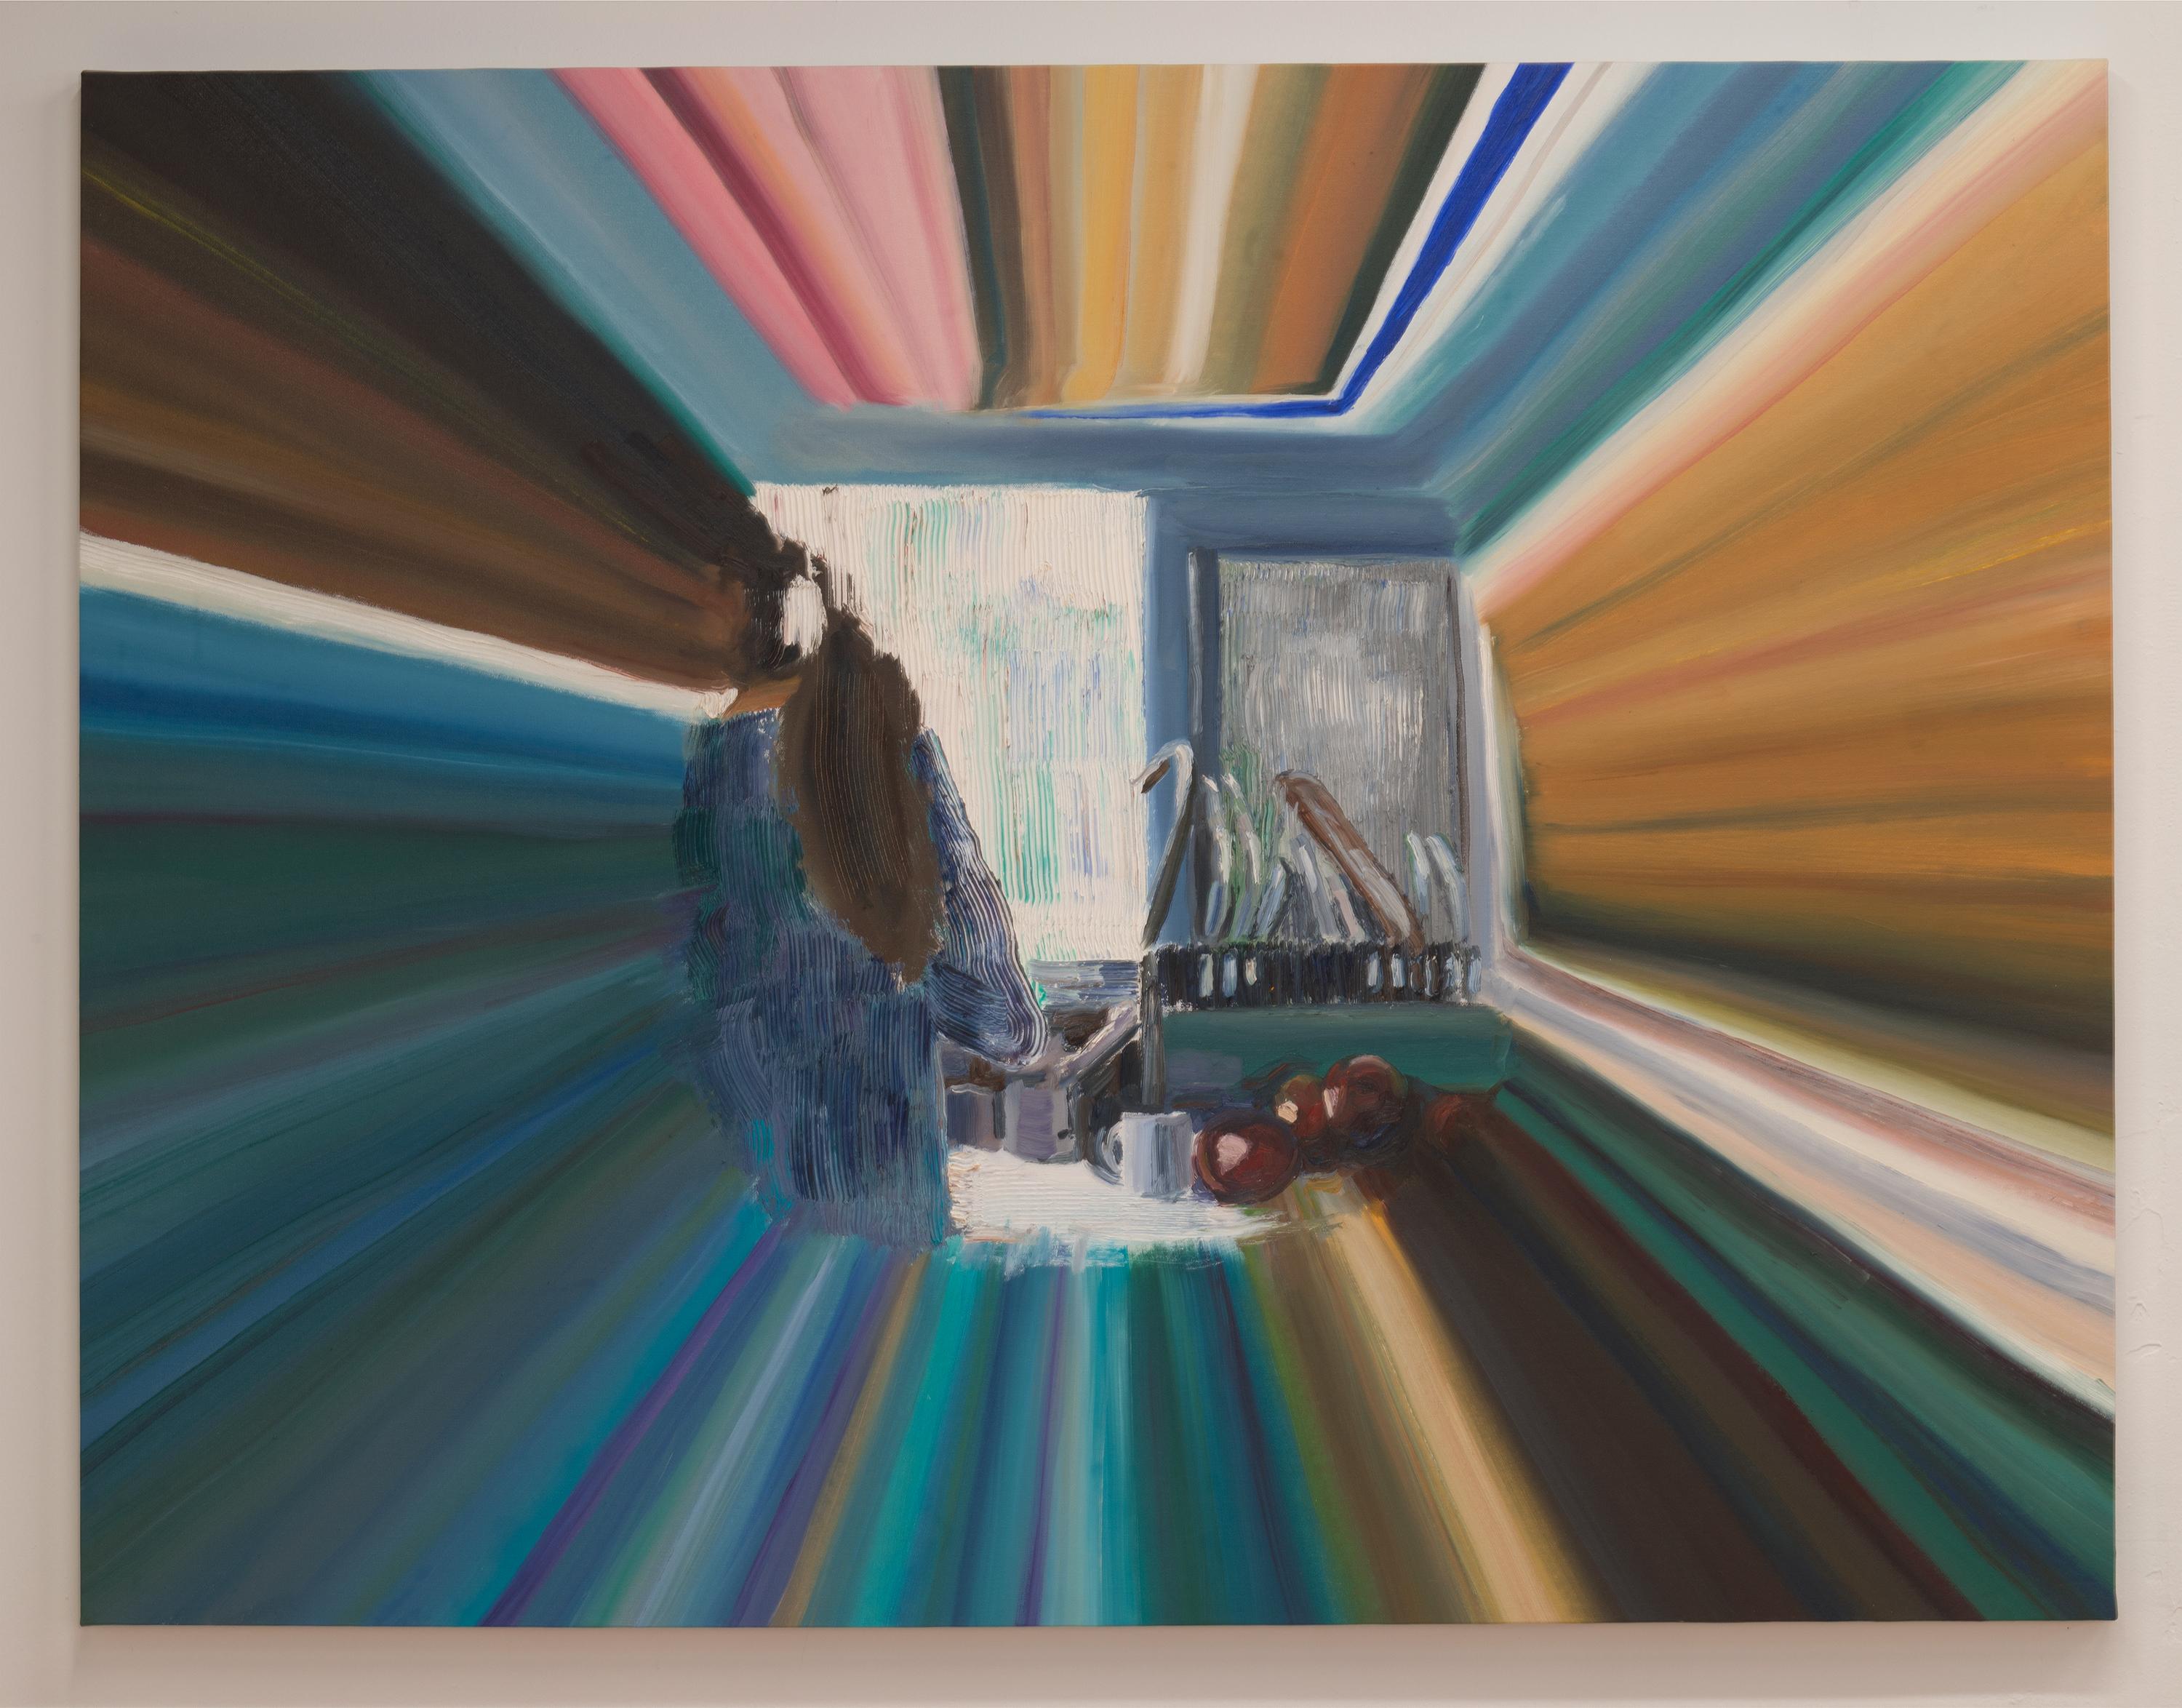 KITCHEN SINK (w/ RAYS) is a large scale oil on canvas painting created in 2022 by Eleanor Aldrich. This piece is created using more abstract qualities than her previous work. Utilizing a filter from Apple's Photo Booth, she has created a composition